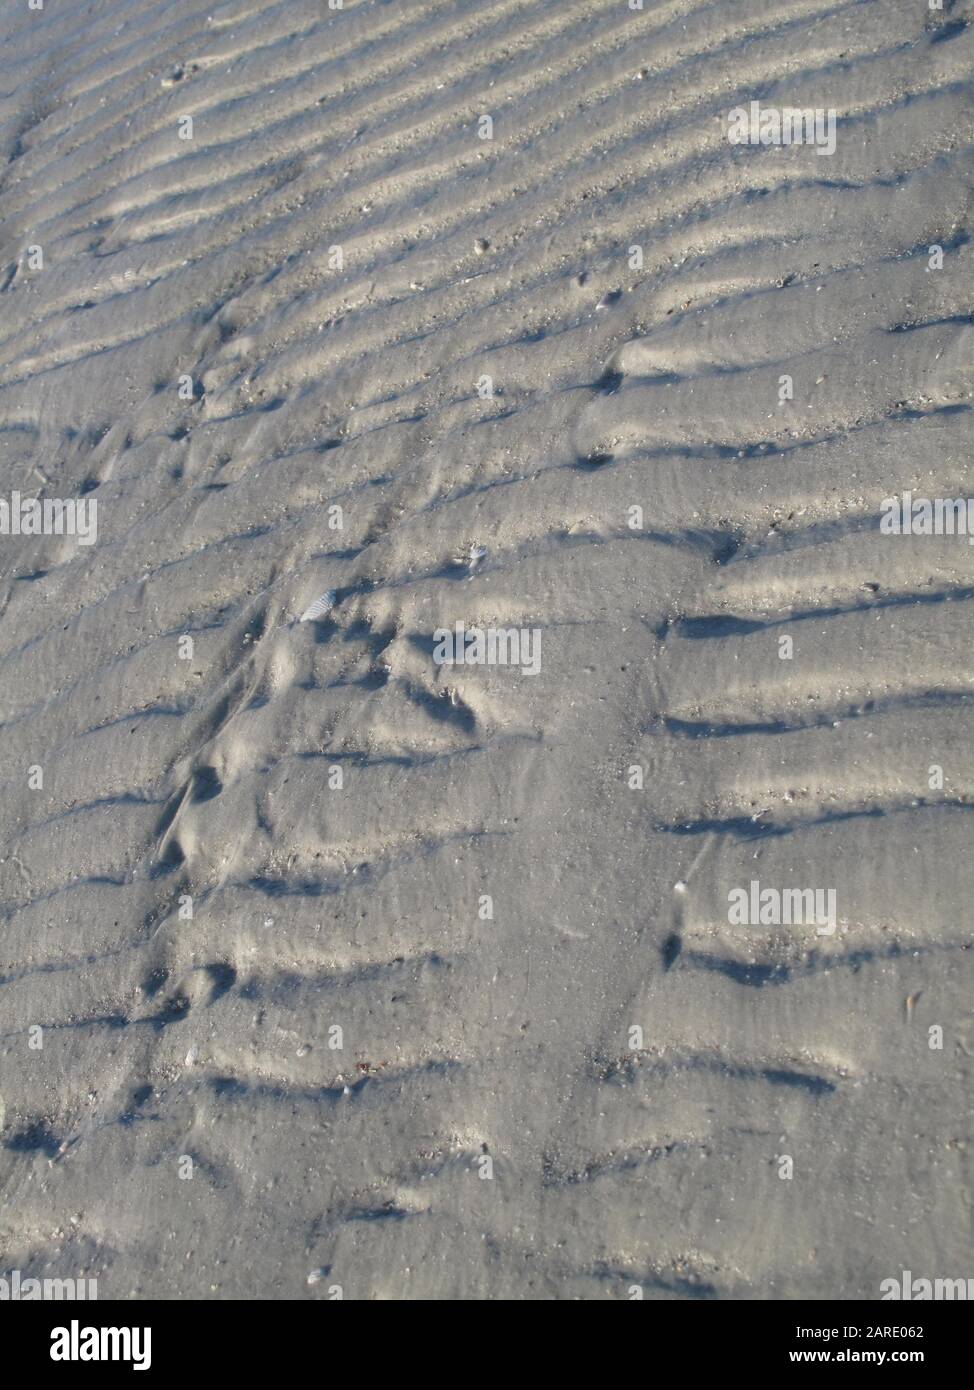 Tractor tracks in sand on beach Stock Photo